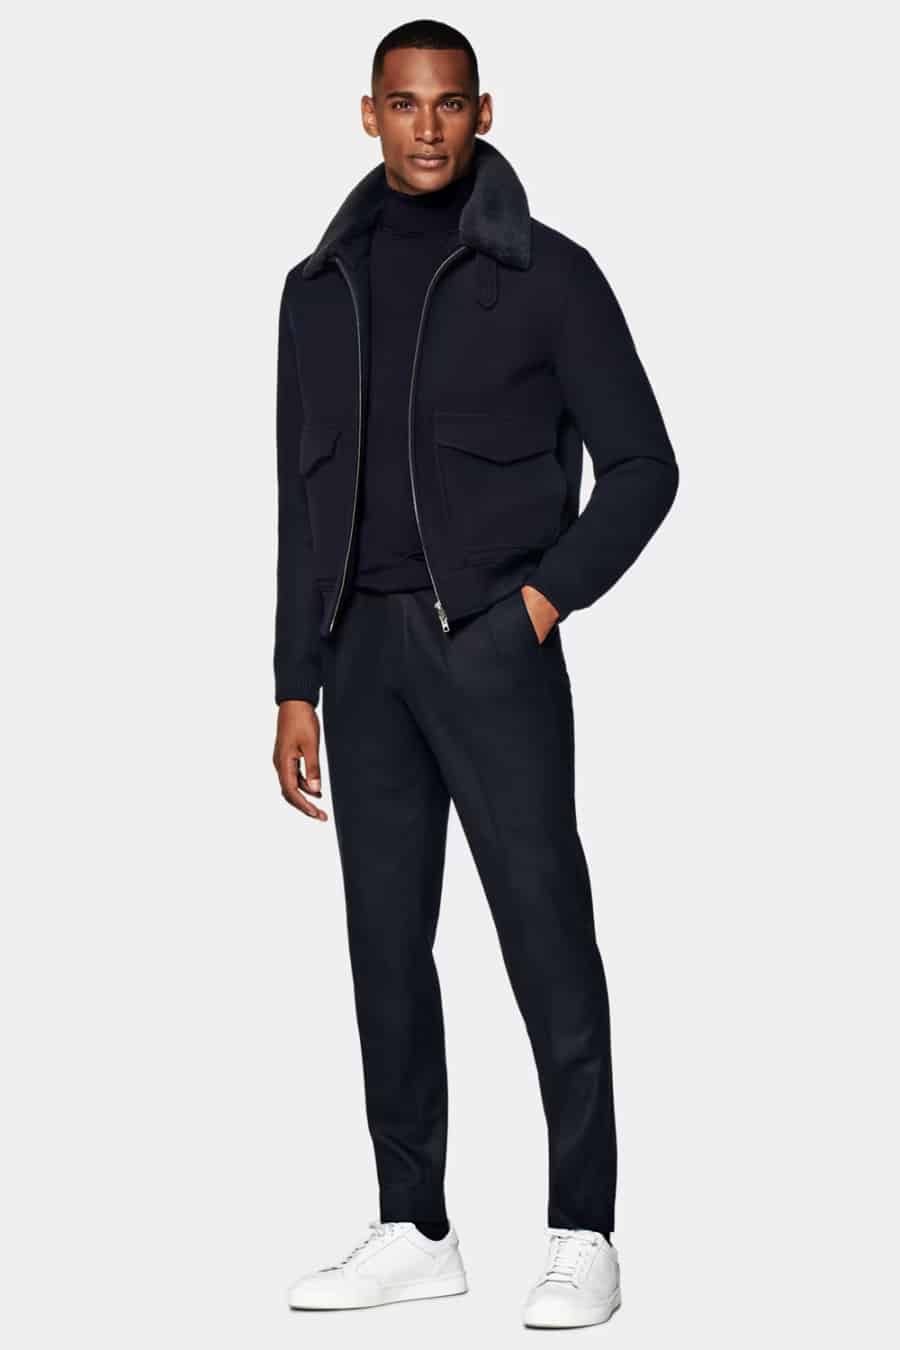 Men's navy wool trousers, navy roll neck jumper, navy shearling collar bomber jacket and white sneakers outfit